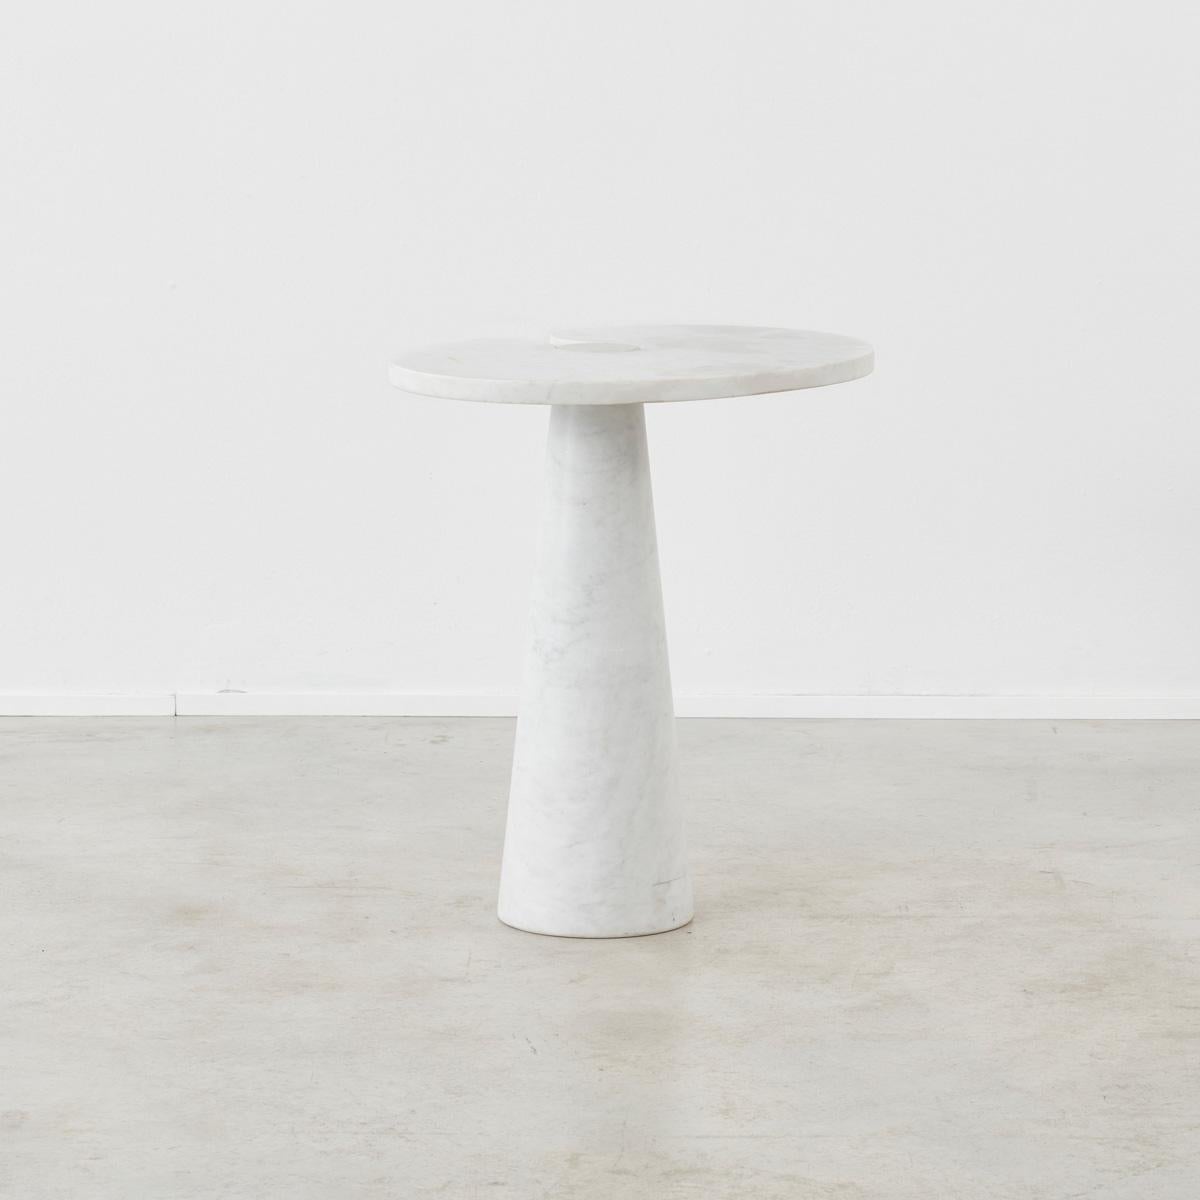 Angelo Mangiarotti’s (1921-2012) central philosophy as an architect was to create forms that responded directly to the material’s properties. The weight of marble inspired him to create the Eros series of tables in the 1970s for Skipper. It relies